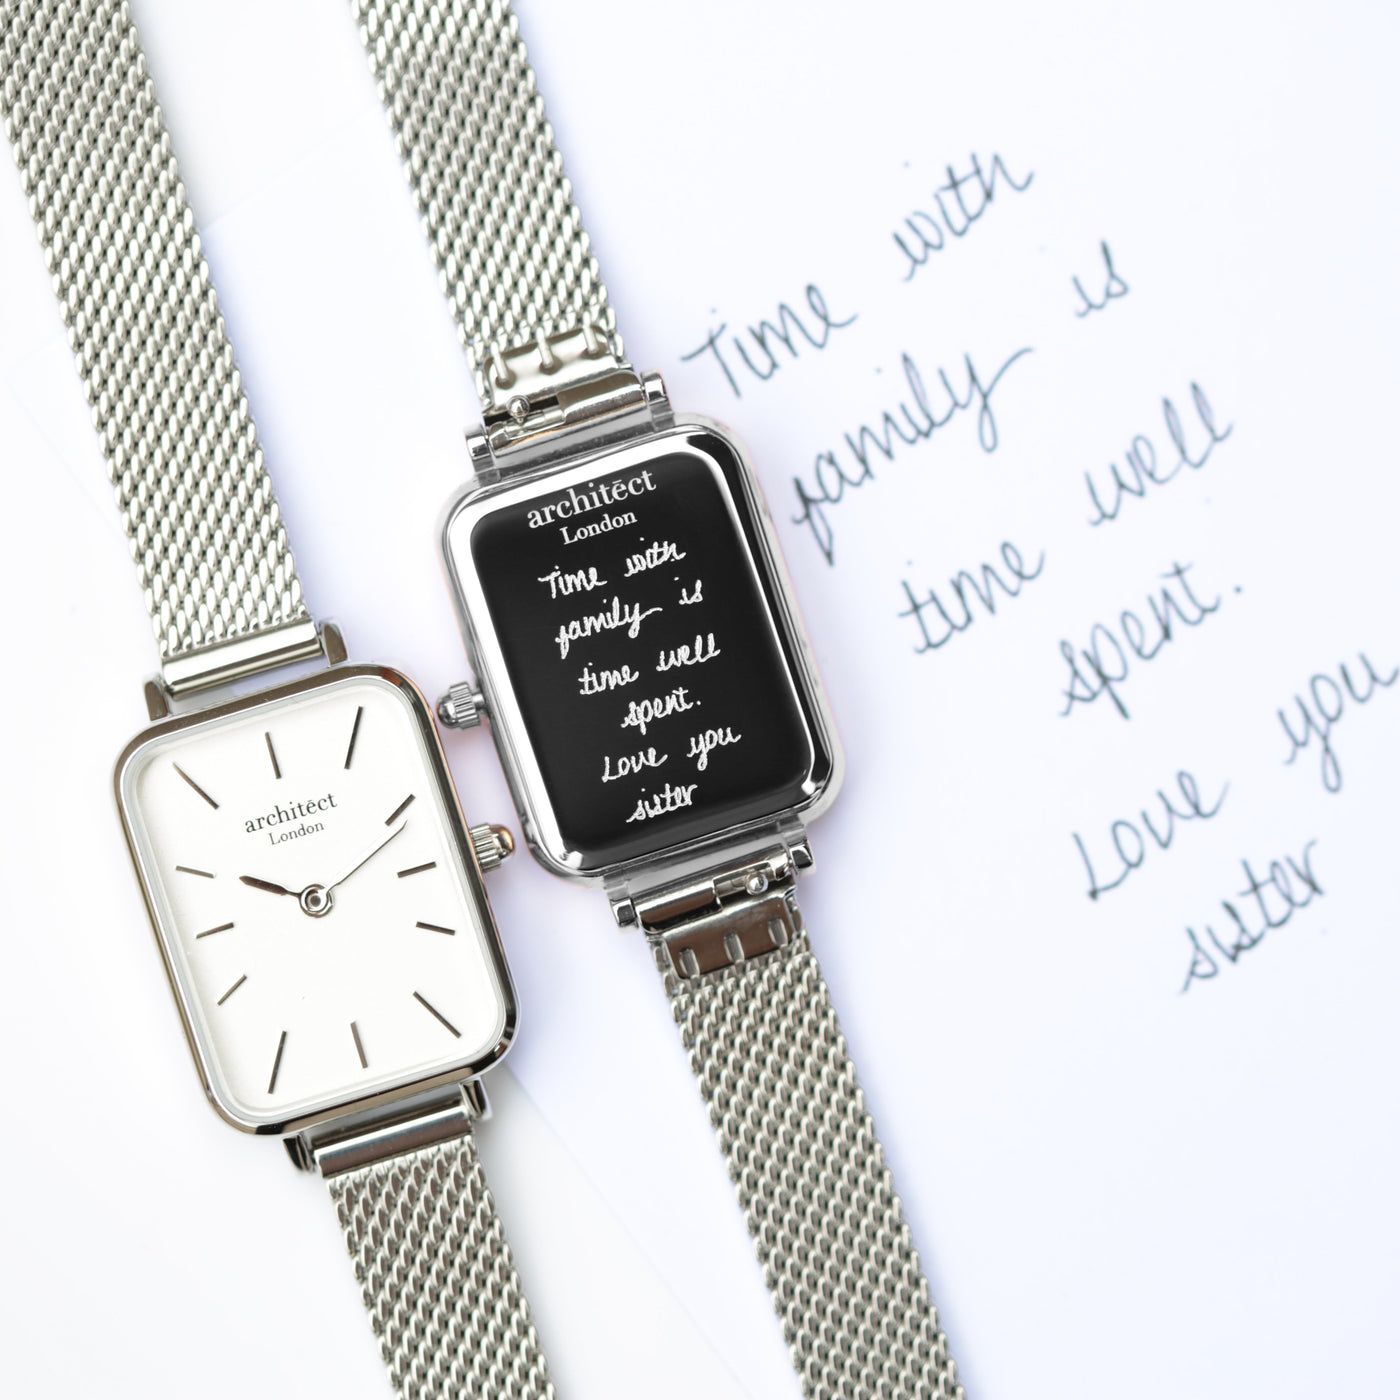 Ladies Architect Lille Watch - Cloud Silver - Handwriting Engraving